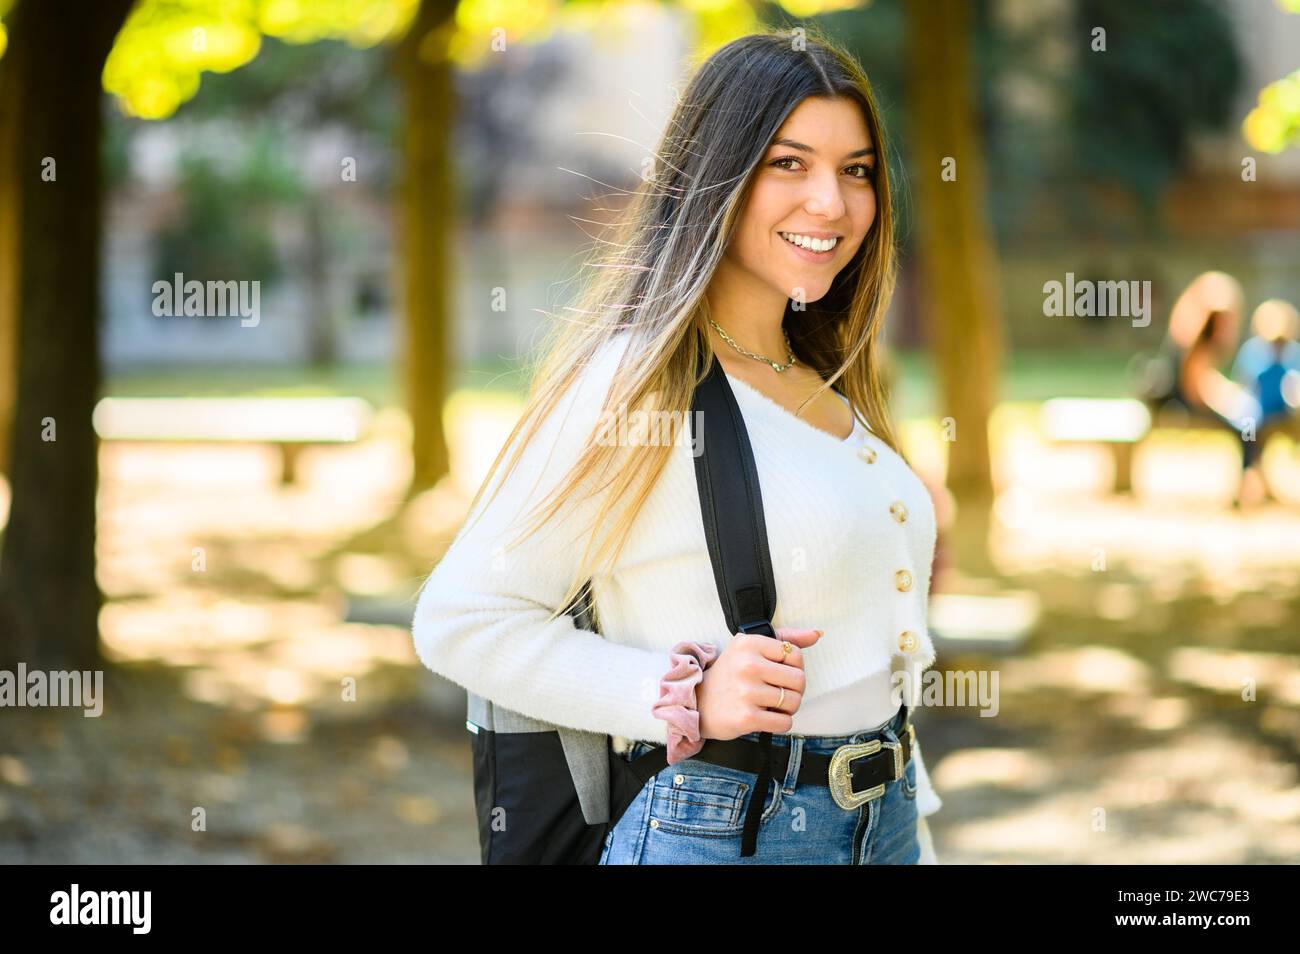 Female student holding walking outdoor in the park and smiling Stock Photo